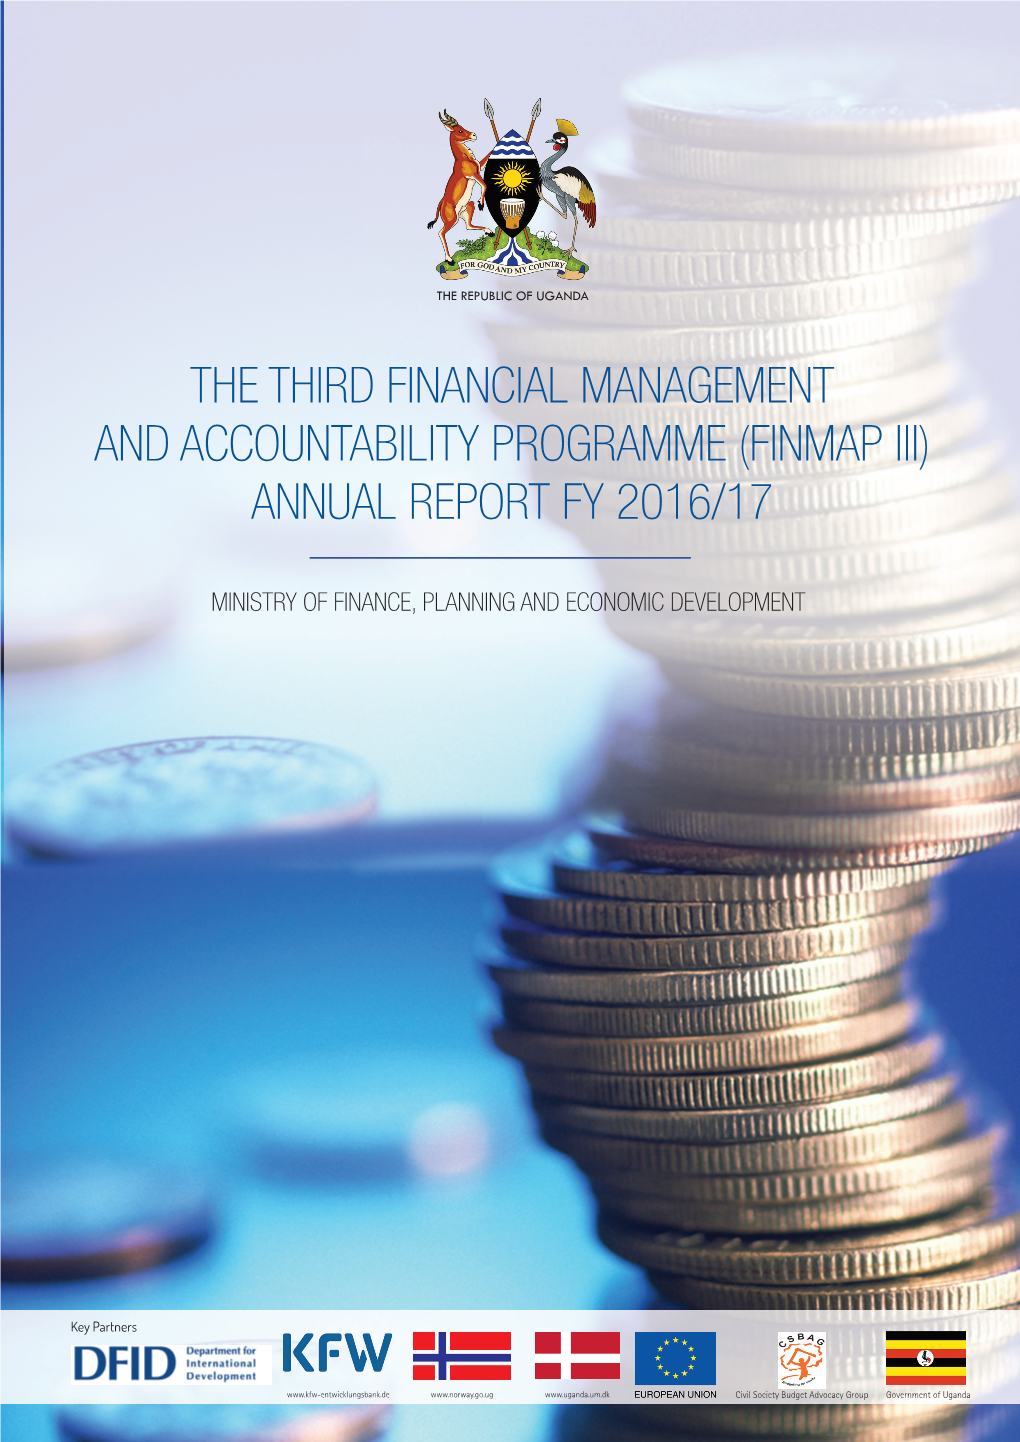 (Finmap Iii) Annual Report Fy 2016/17